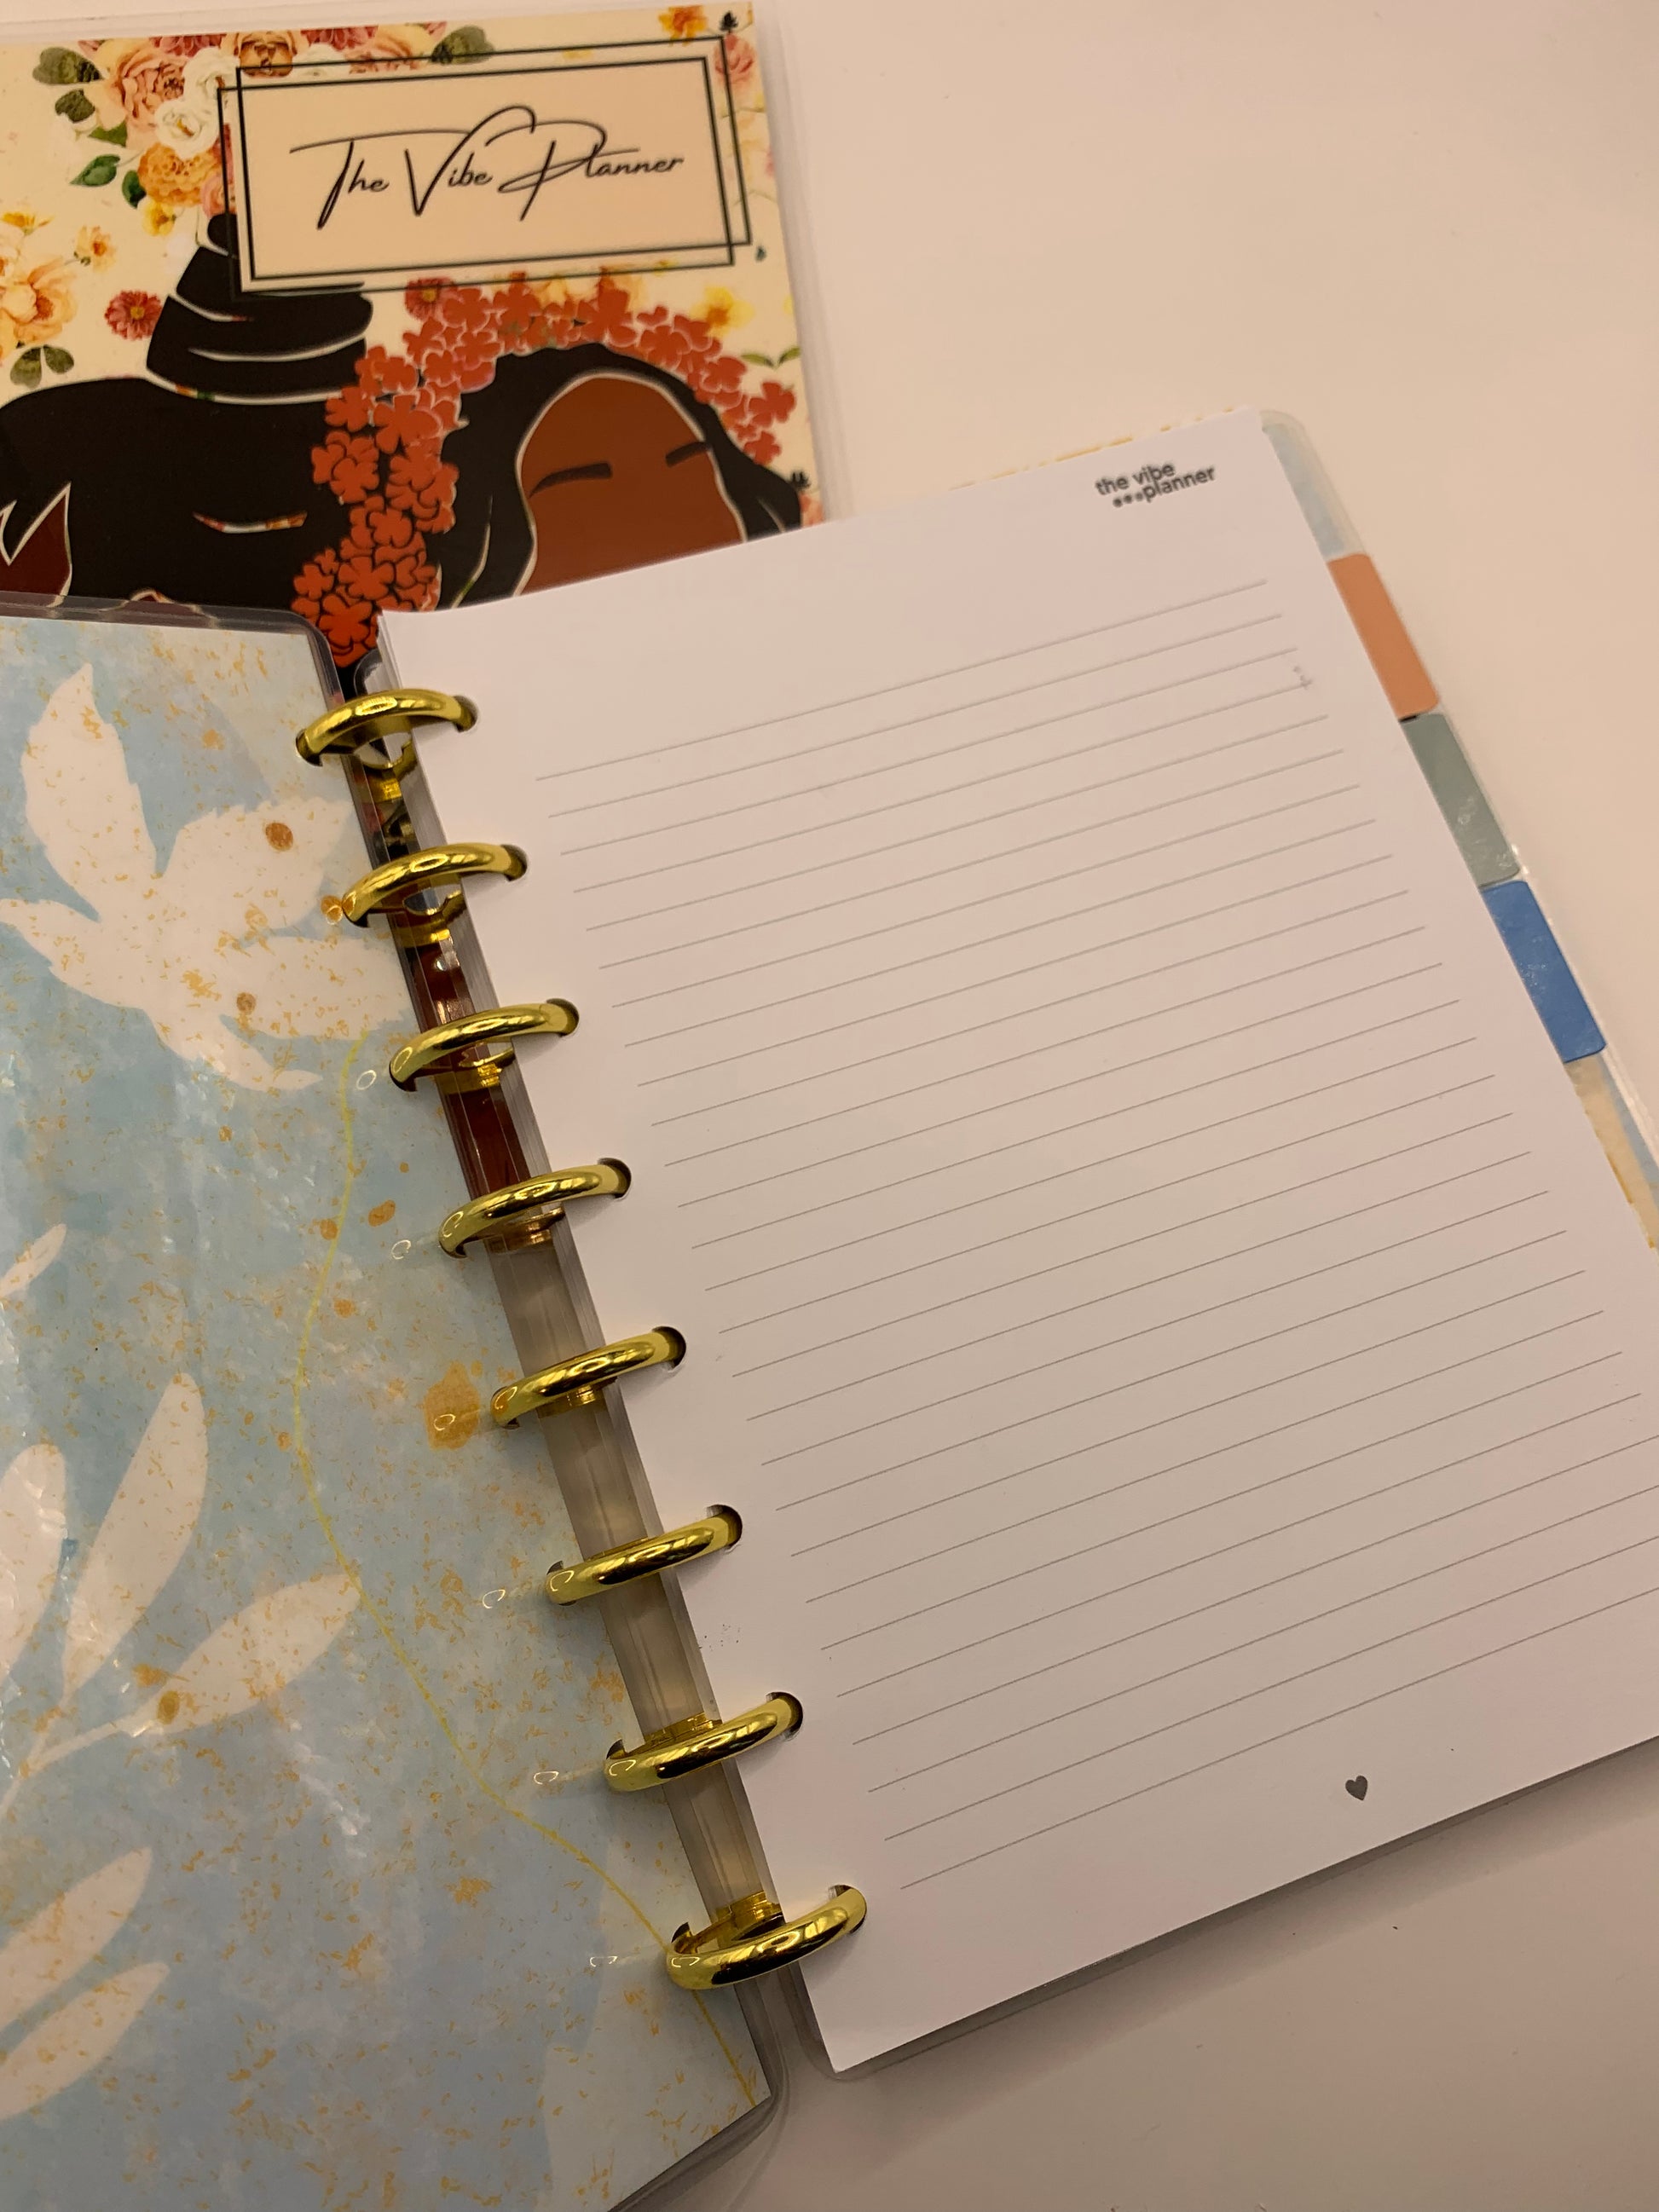 Cream and Strawberries Notebook - Discbound - The Vibe Planner